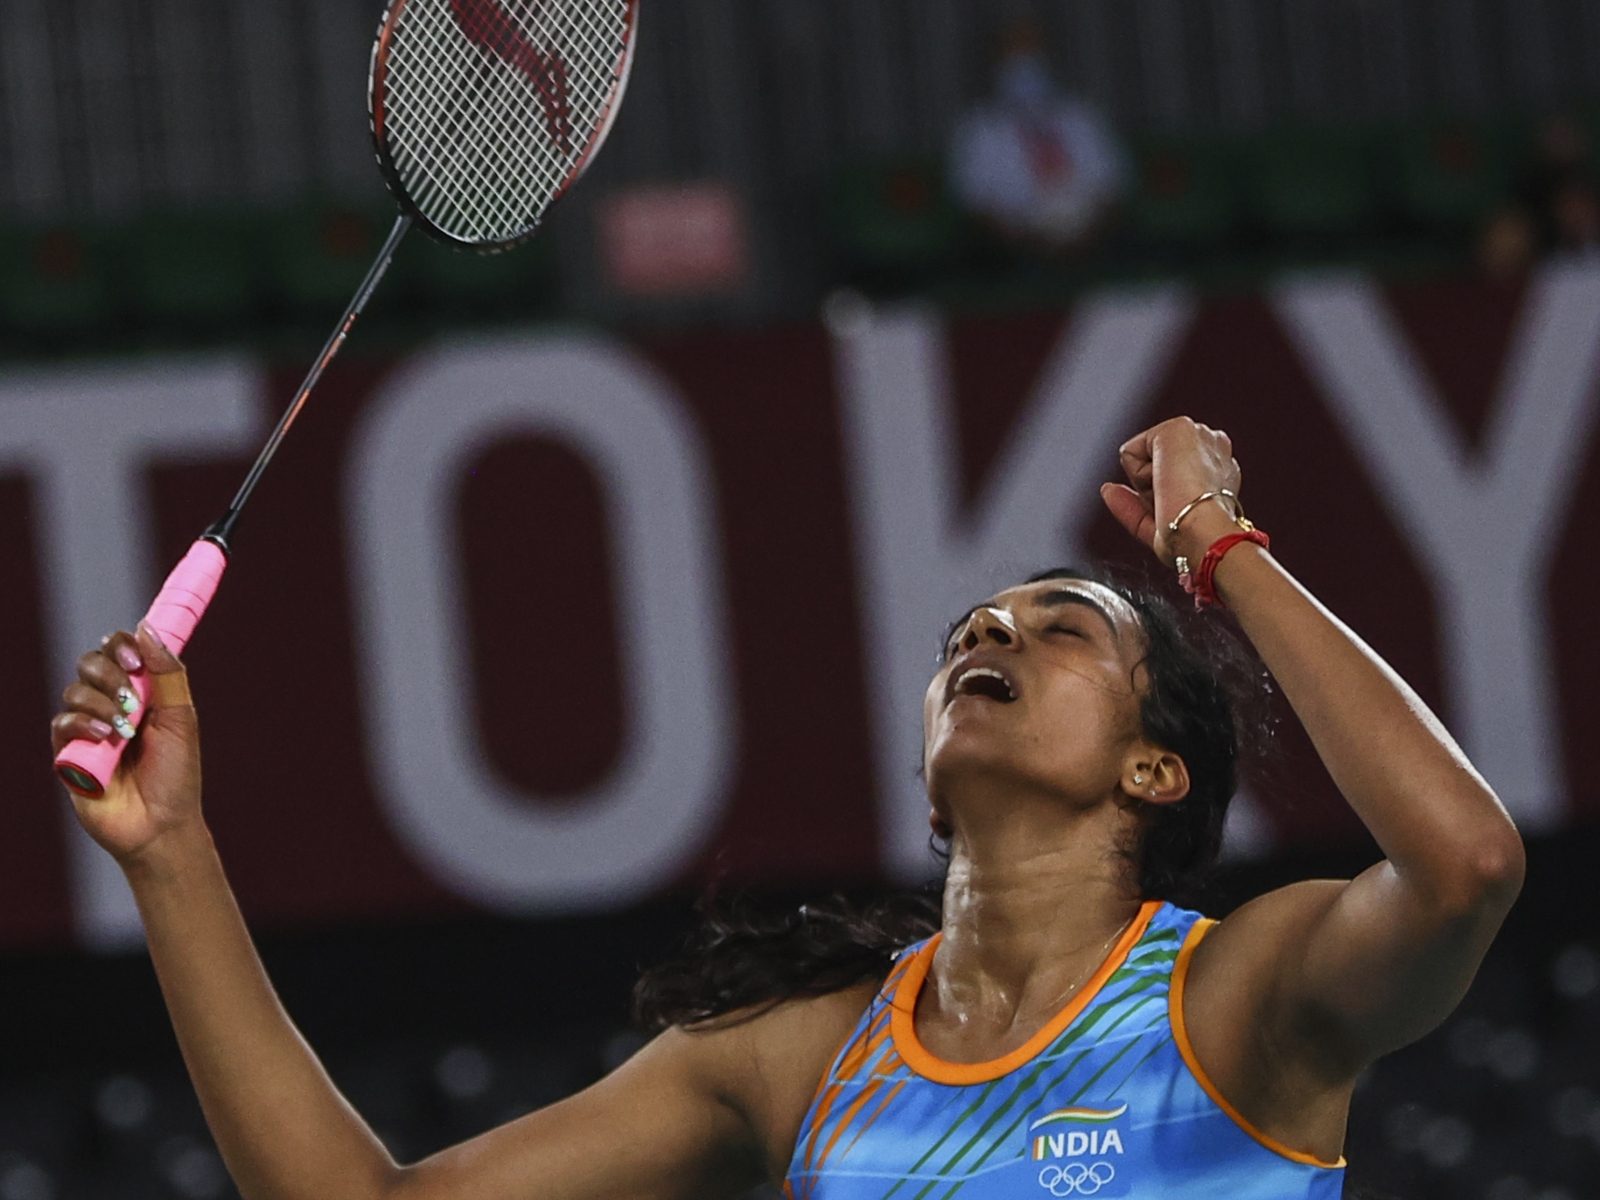 French Open: PV Sindhu, Lakshya Sen Win, Saina Nehwal Retires Midway on  Mixed Day for India - News18